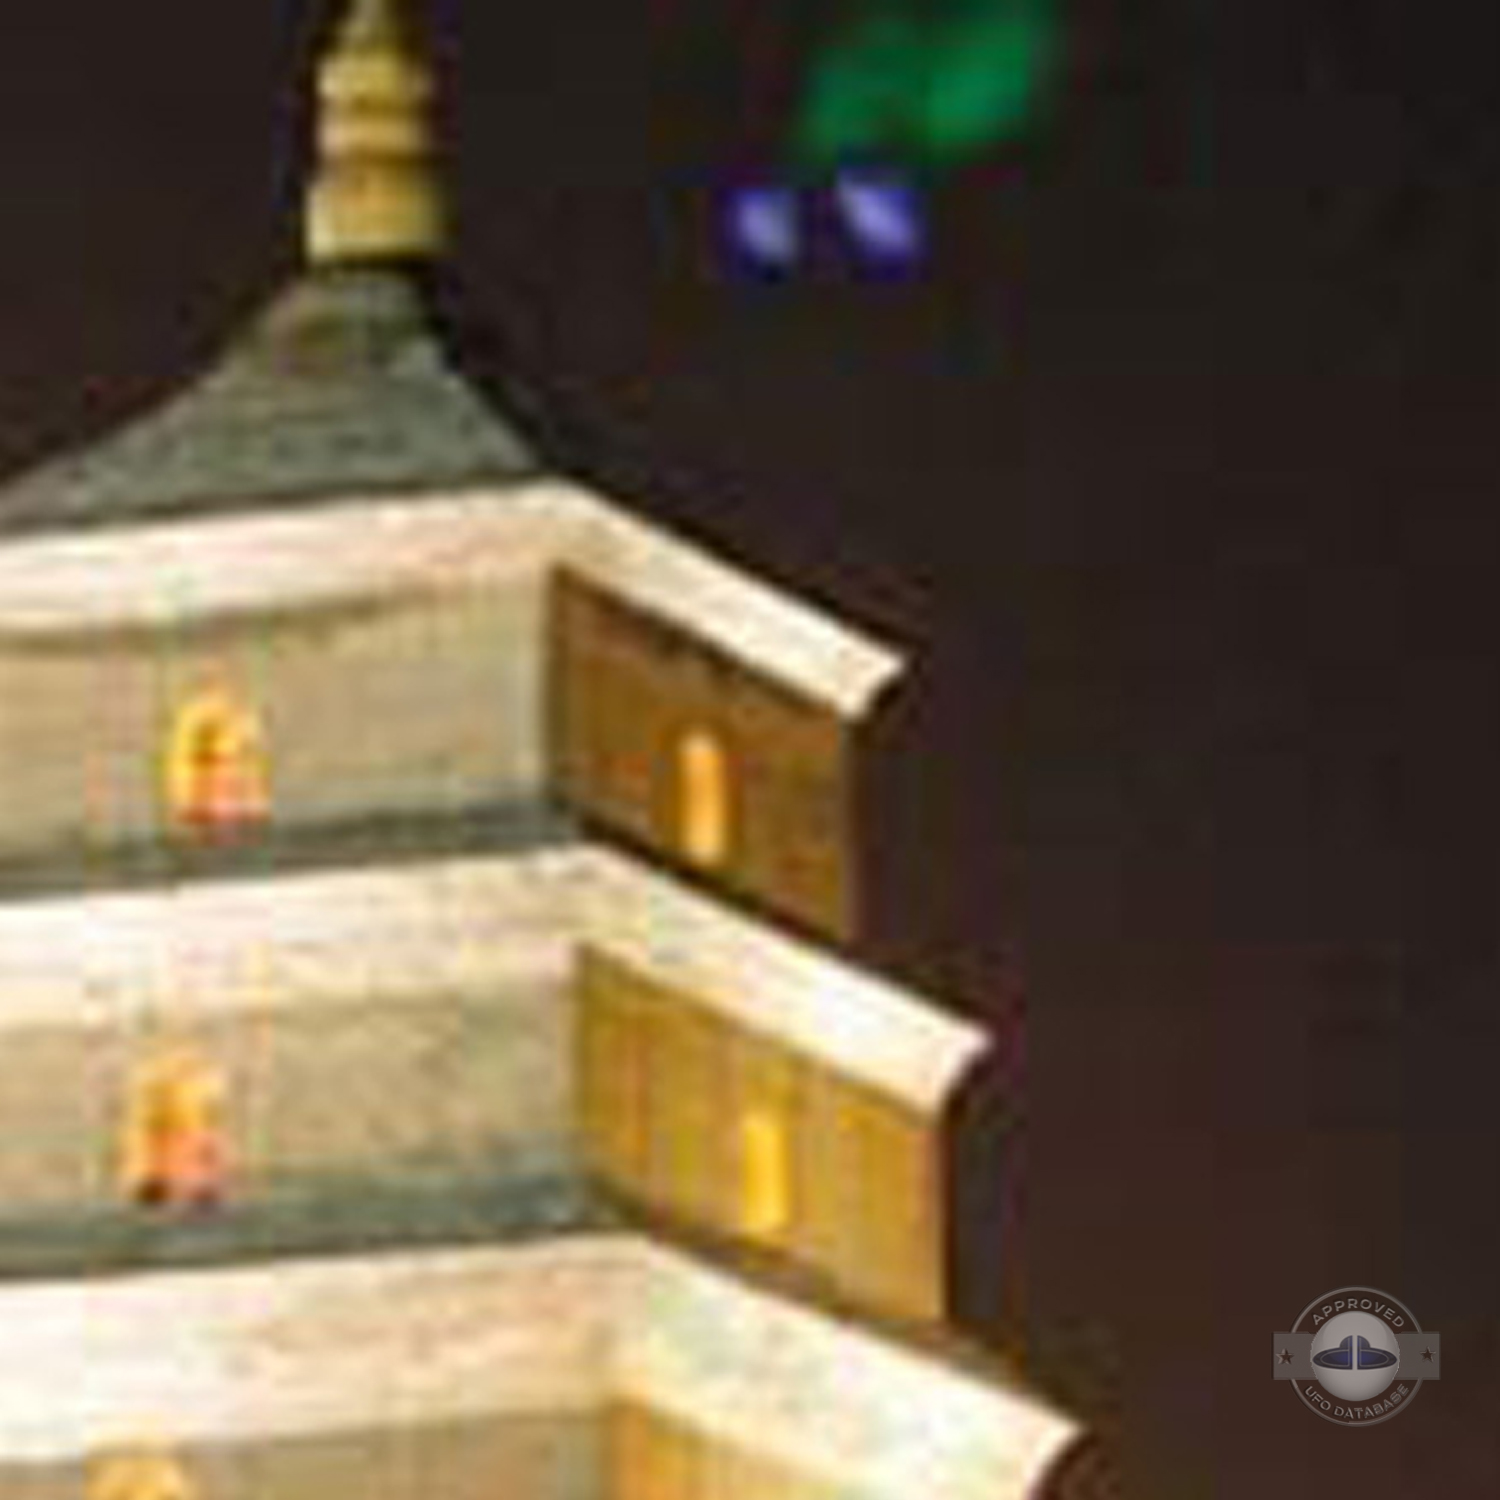 Purple glowing UFO over Giant Wild Goose Pagoda temple | China | 2009 UFO Picture #219-3